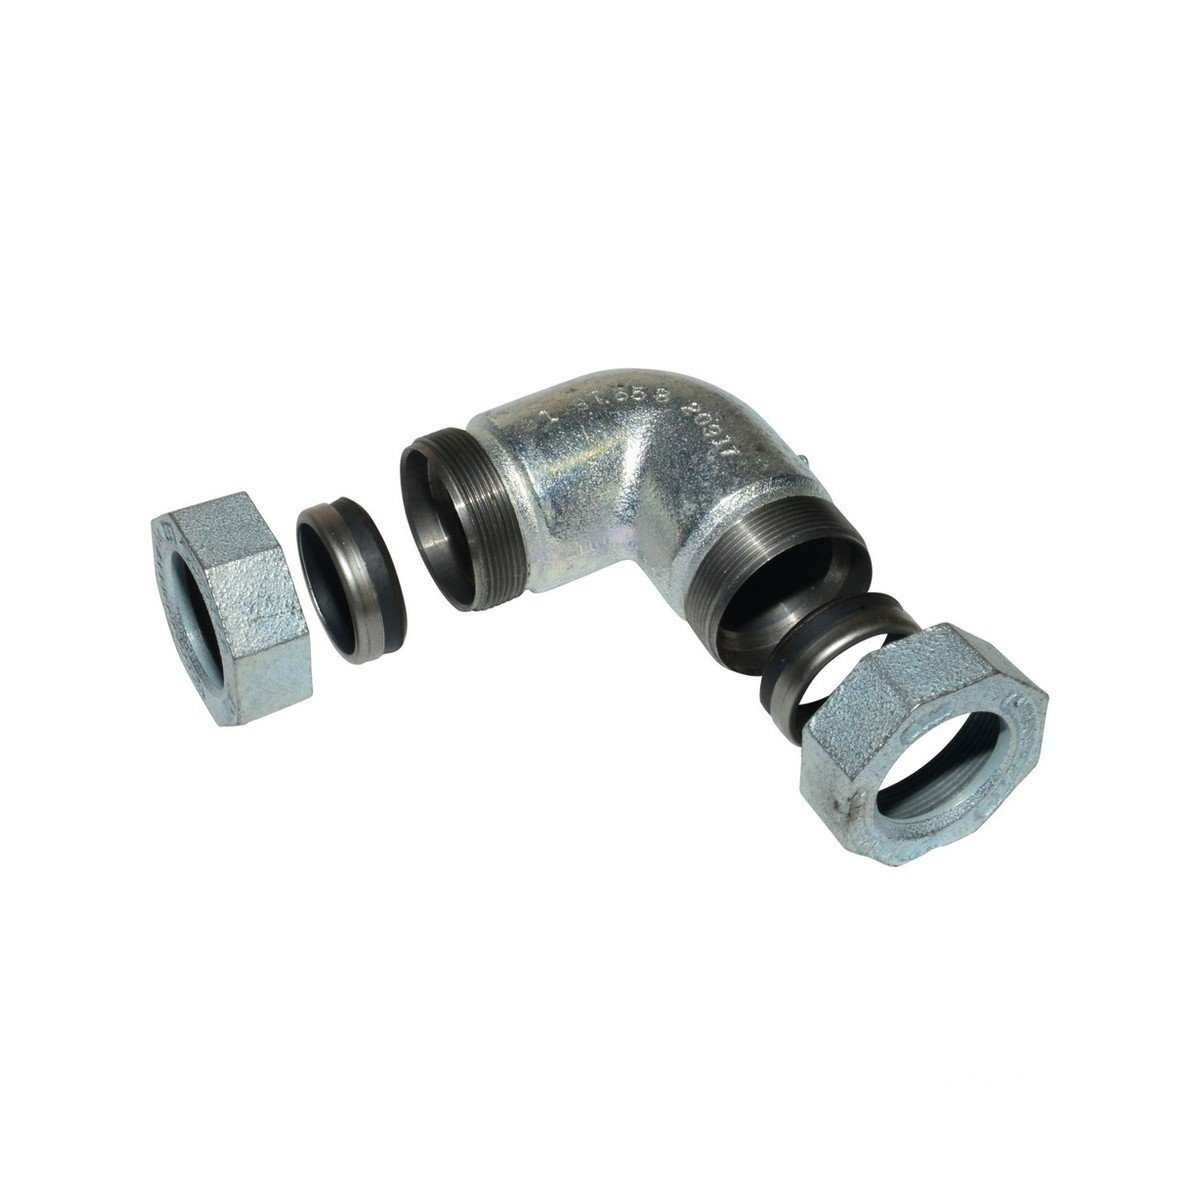 COMPRESSION FITTINGS MALE BRANCH TEE - Tmi - Compression Fittings